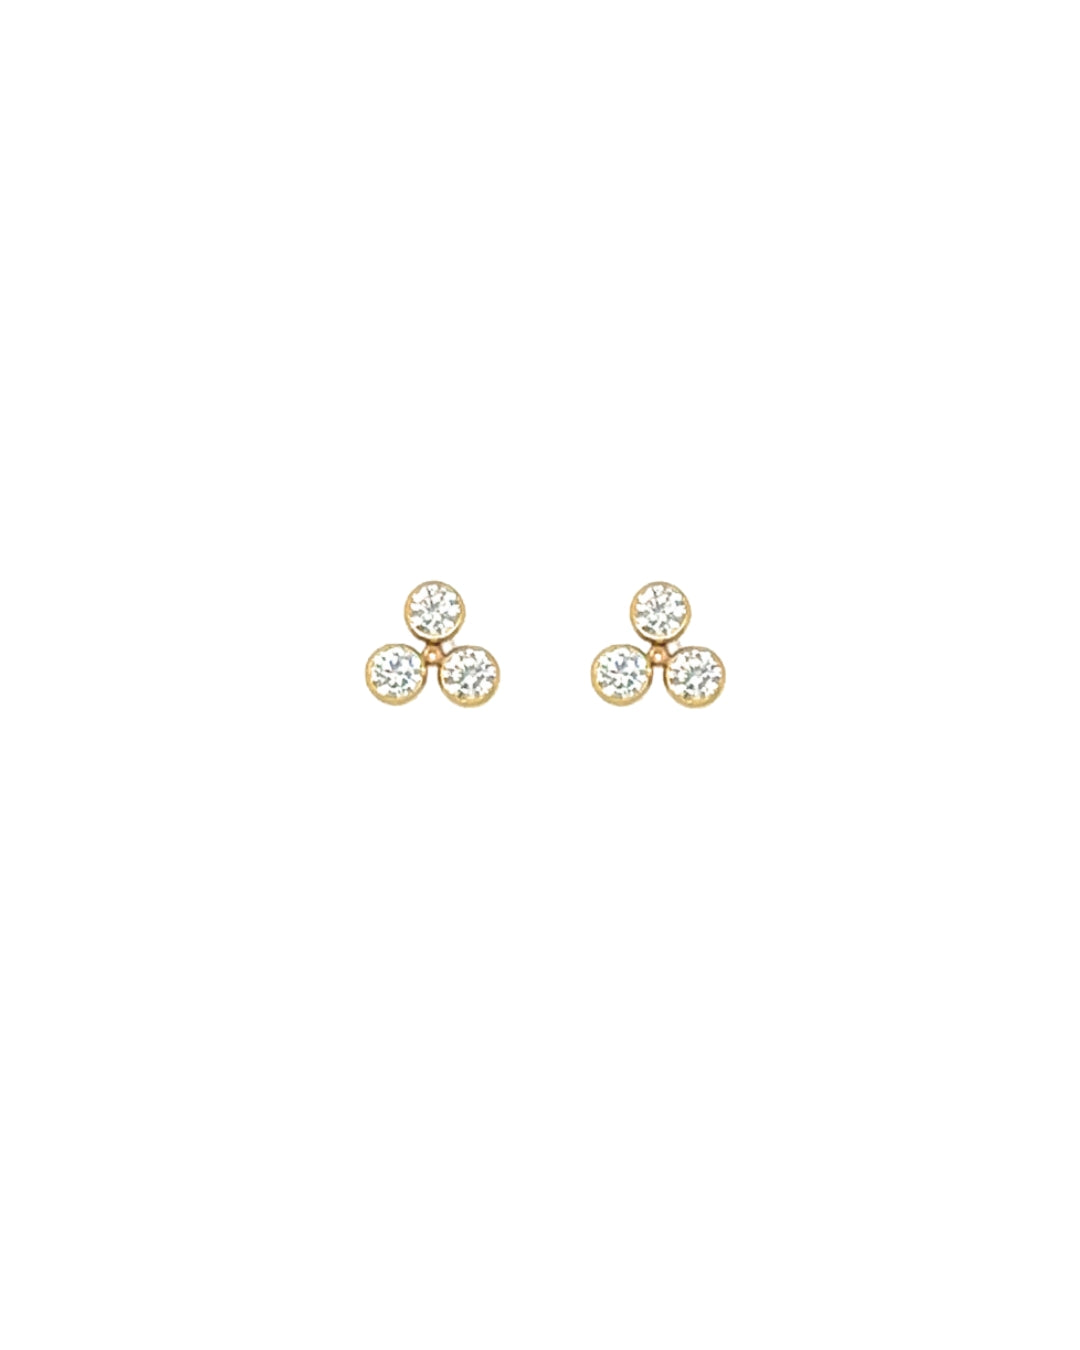 Gold Trio Bezel Stud Earrings with Cubic Zirconia Crystals 